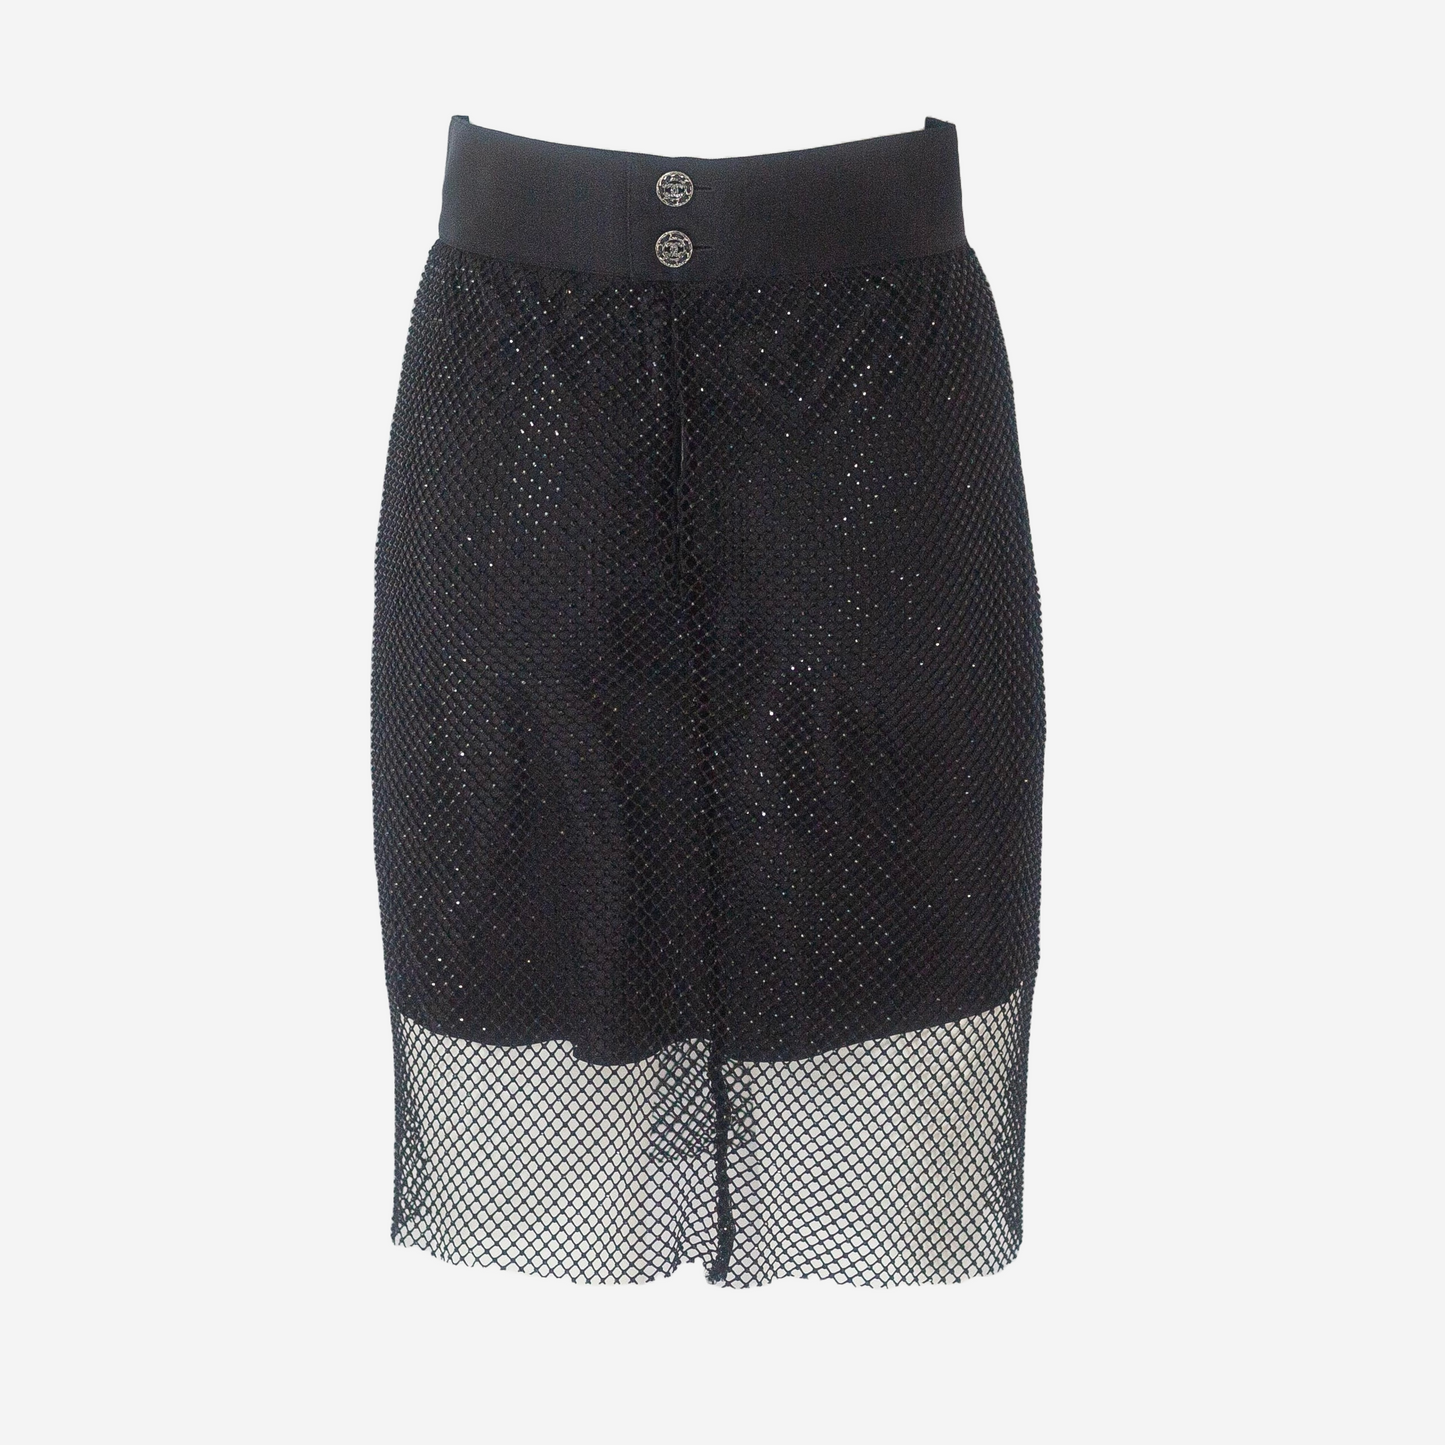 CHANEL - SKIRT BLACK CRYSTALS WHITE CAMELIA WITH LINING SIZE 36 FR